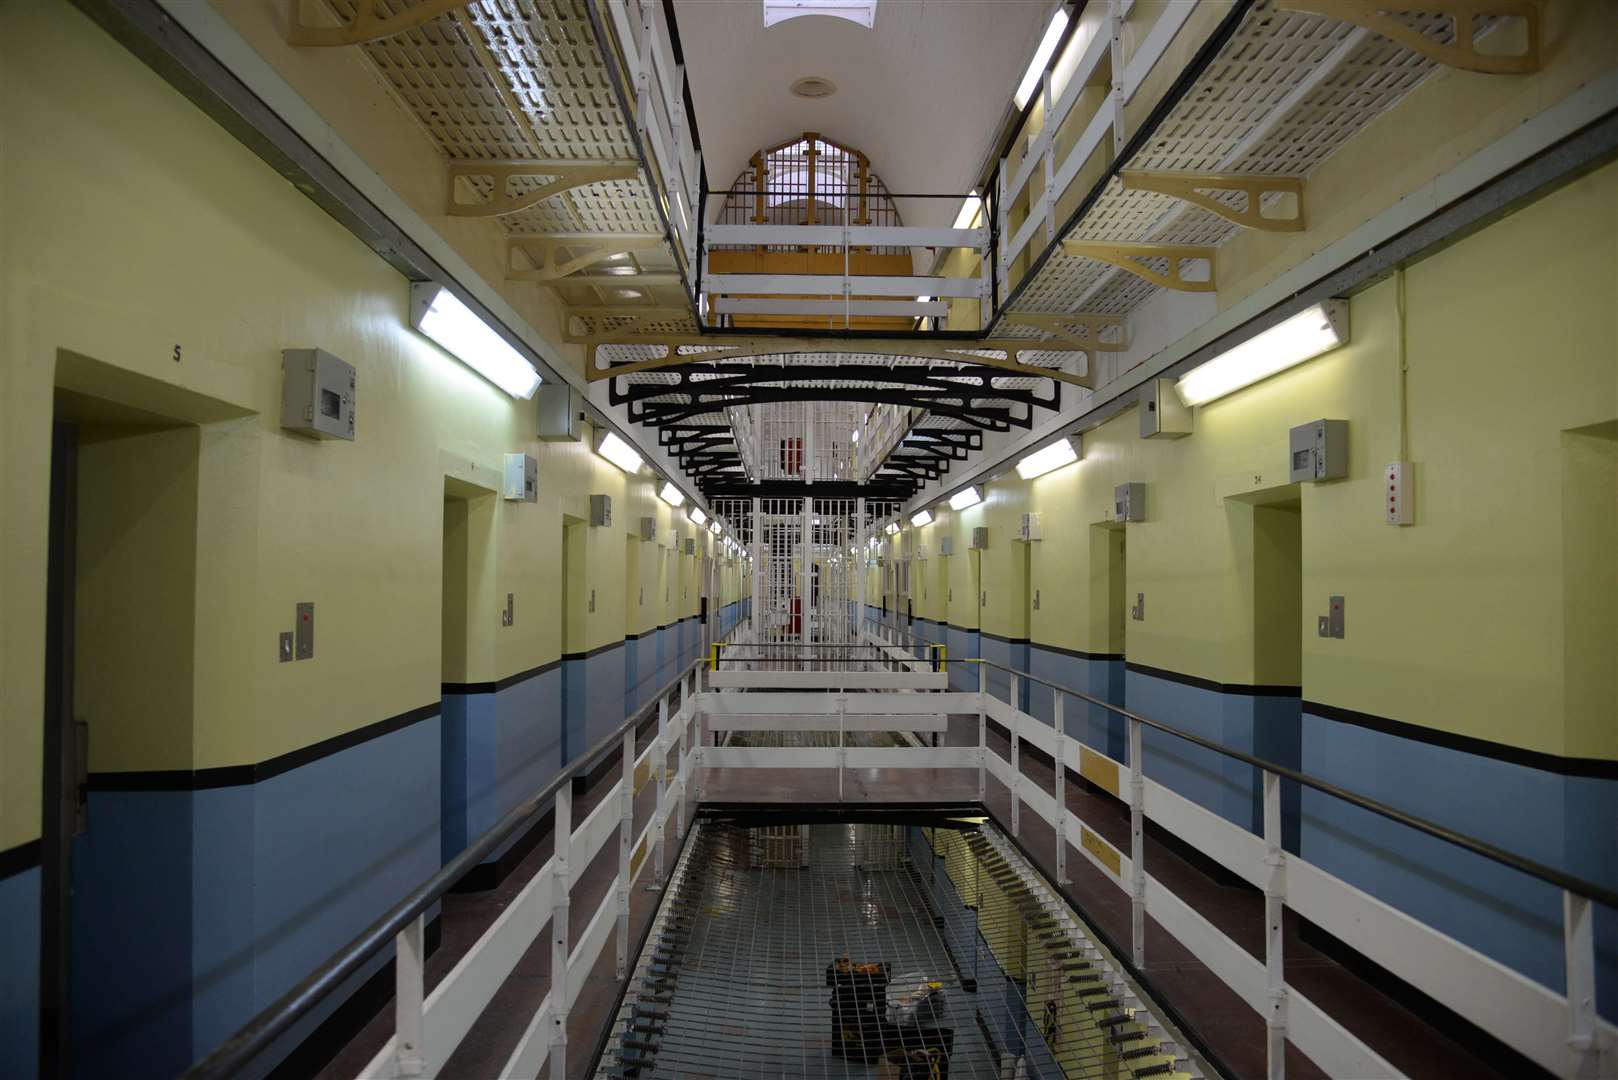 One of the wing's at the former Canterbury Prison. Picture: Chris Davey